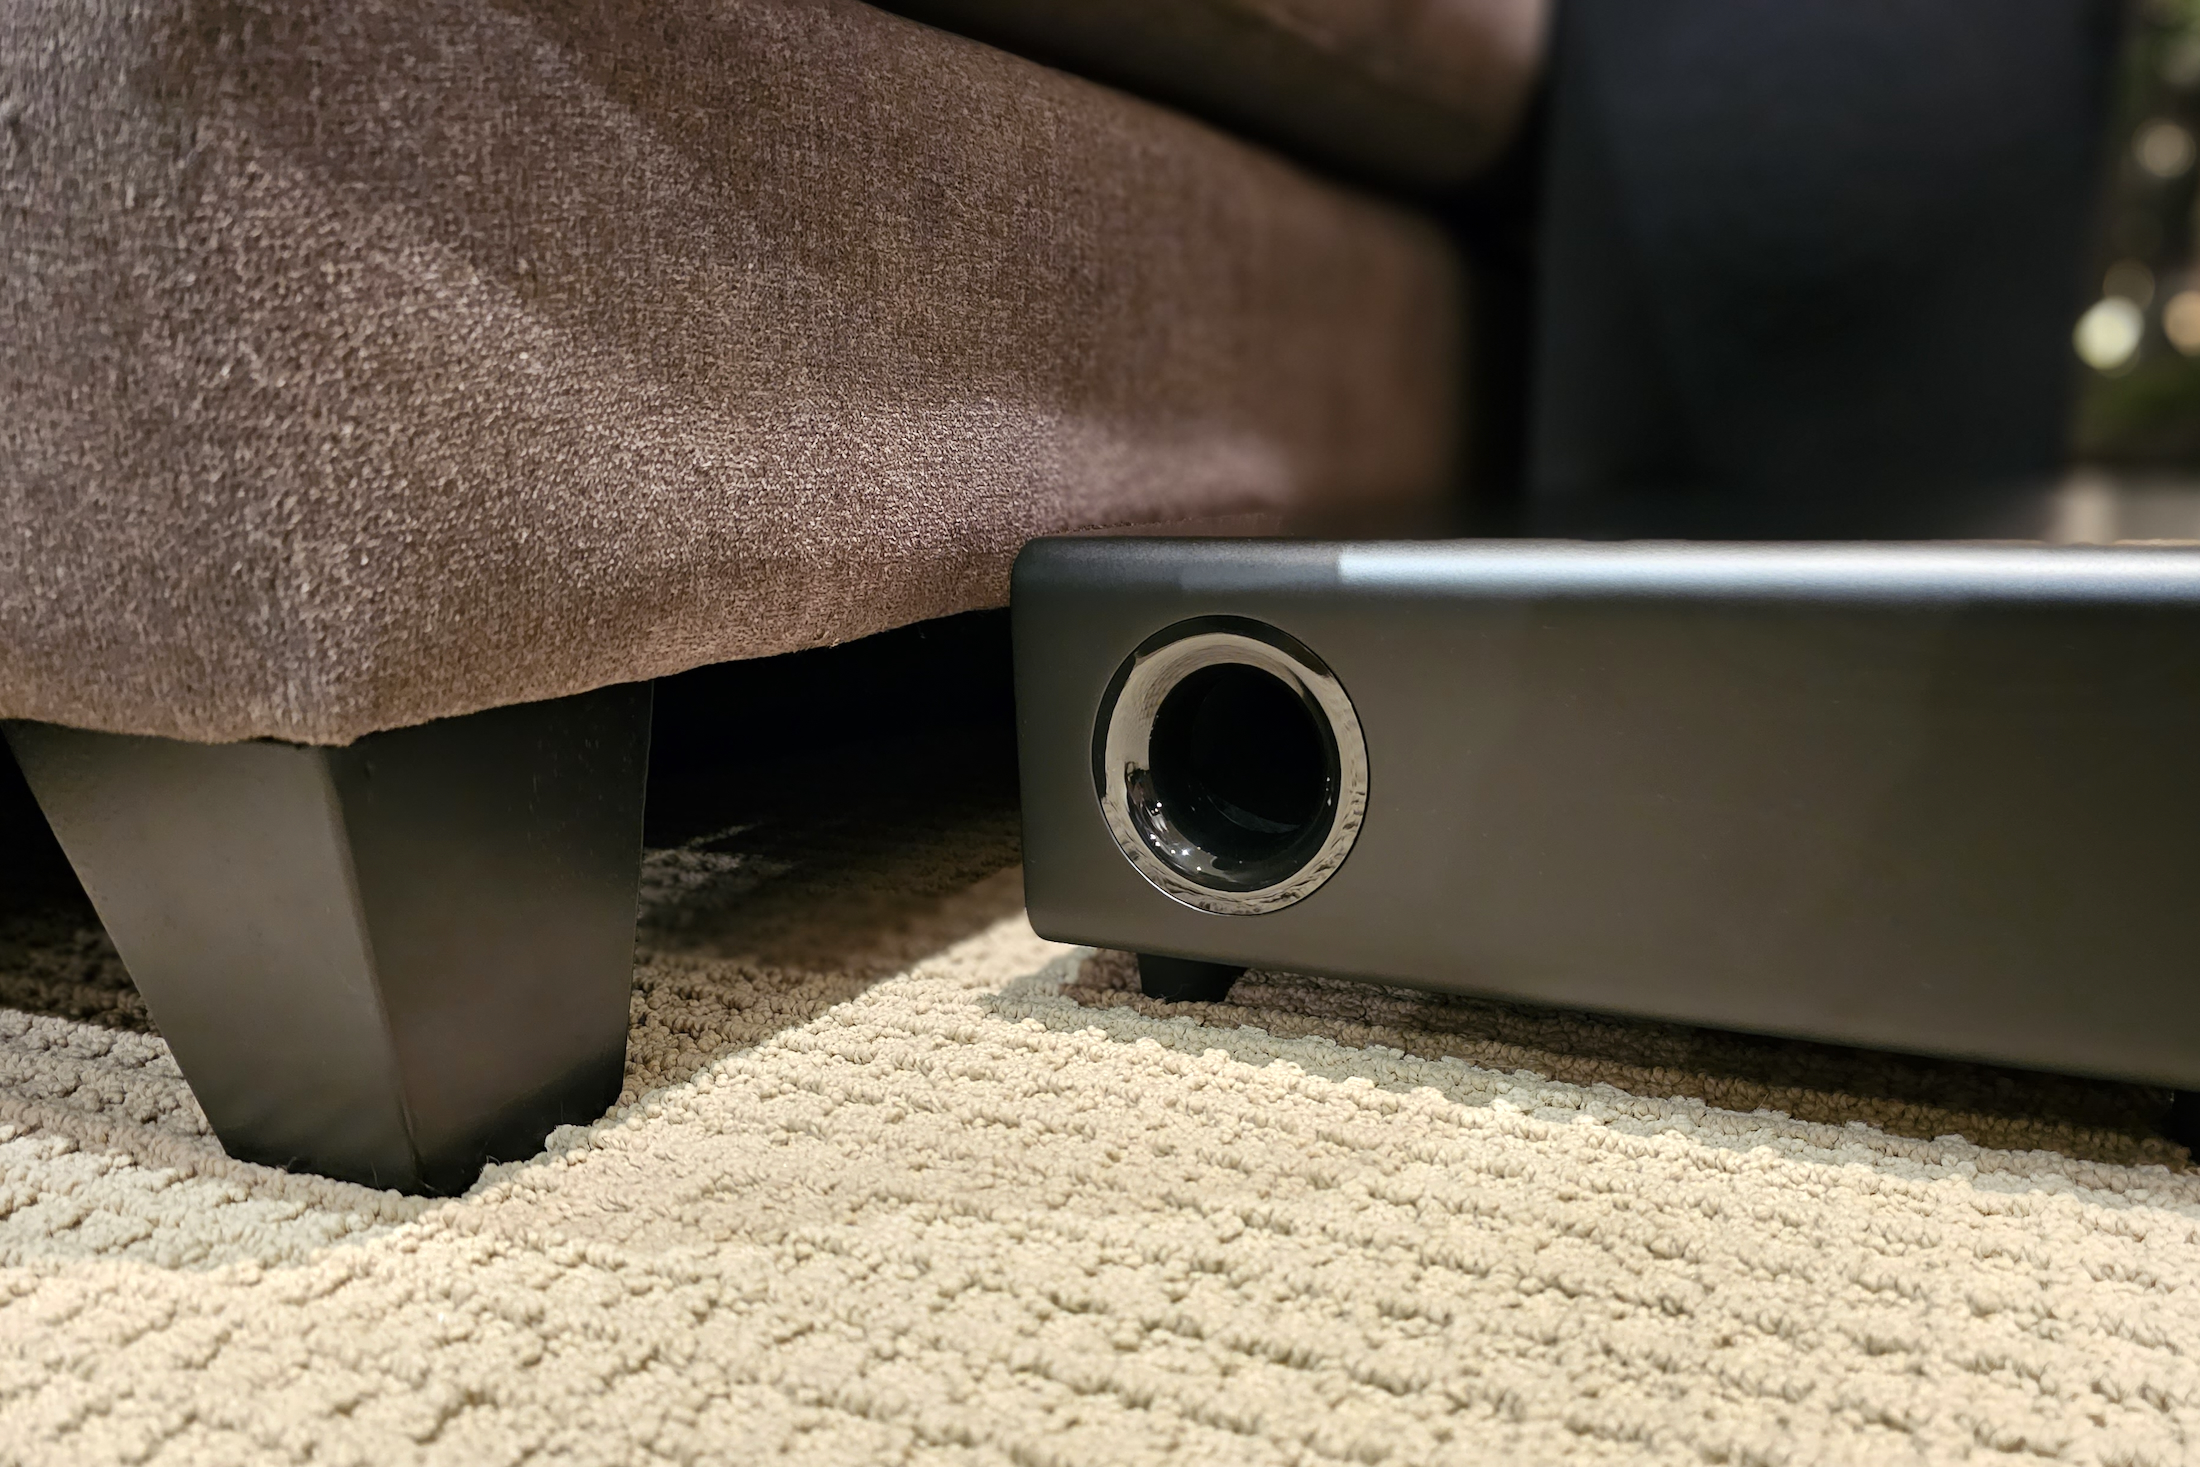 Platin Audio Milan 5.1.4 wireless subwoofer next to couch.